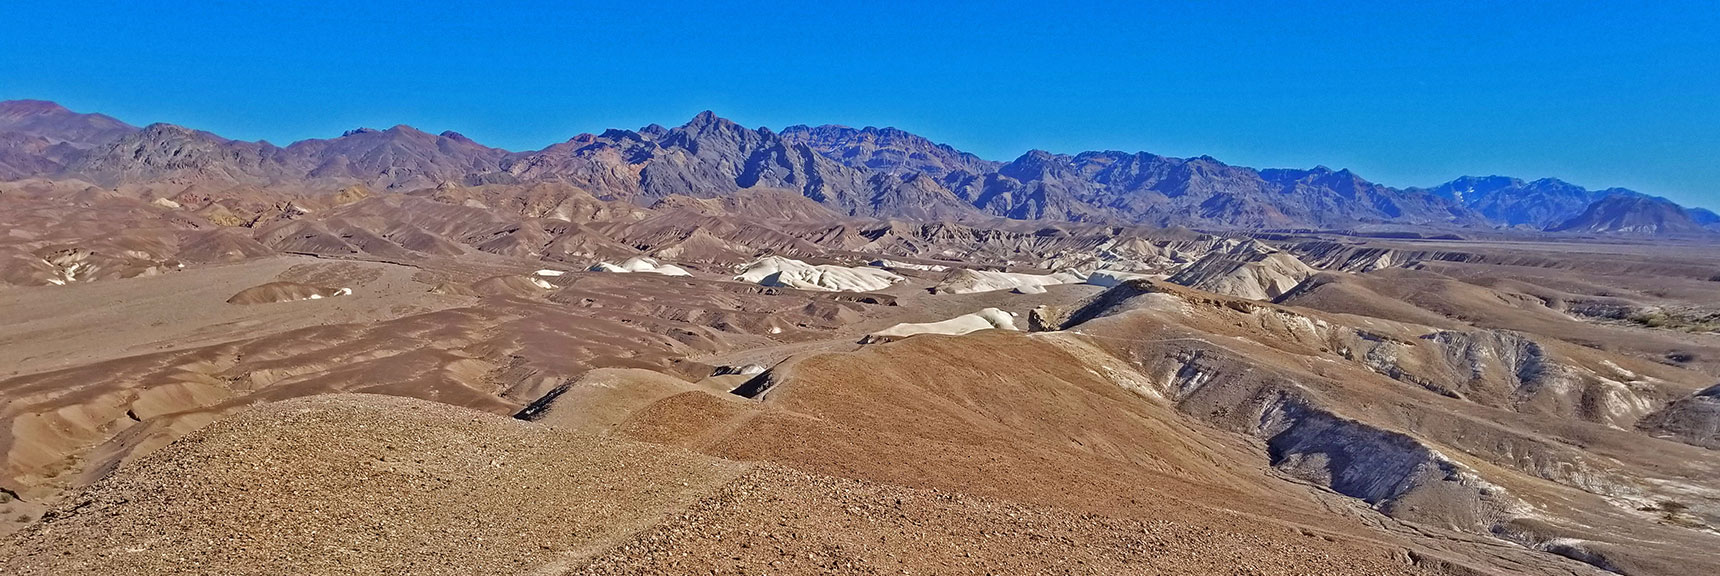 Funeral Mountains to East from Table Rock Summit. | Tea House & Table Rock Circuit | Furnace Creek | Death Valley National Park, California